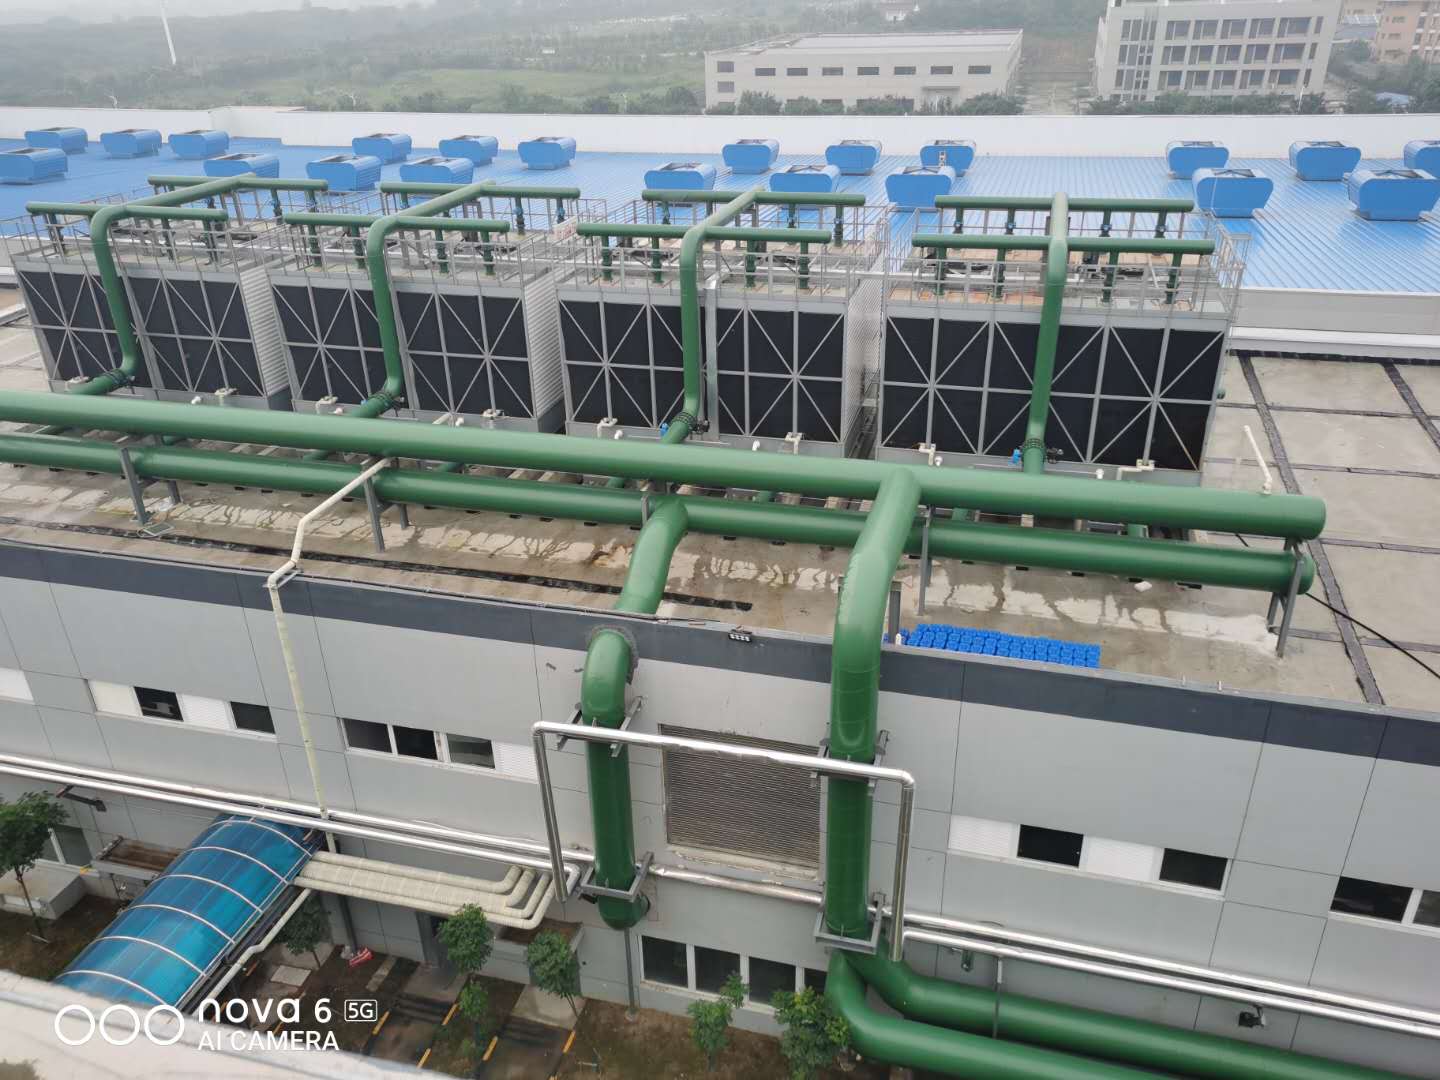 Cooling water system of power station